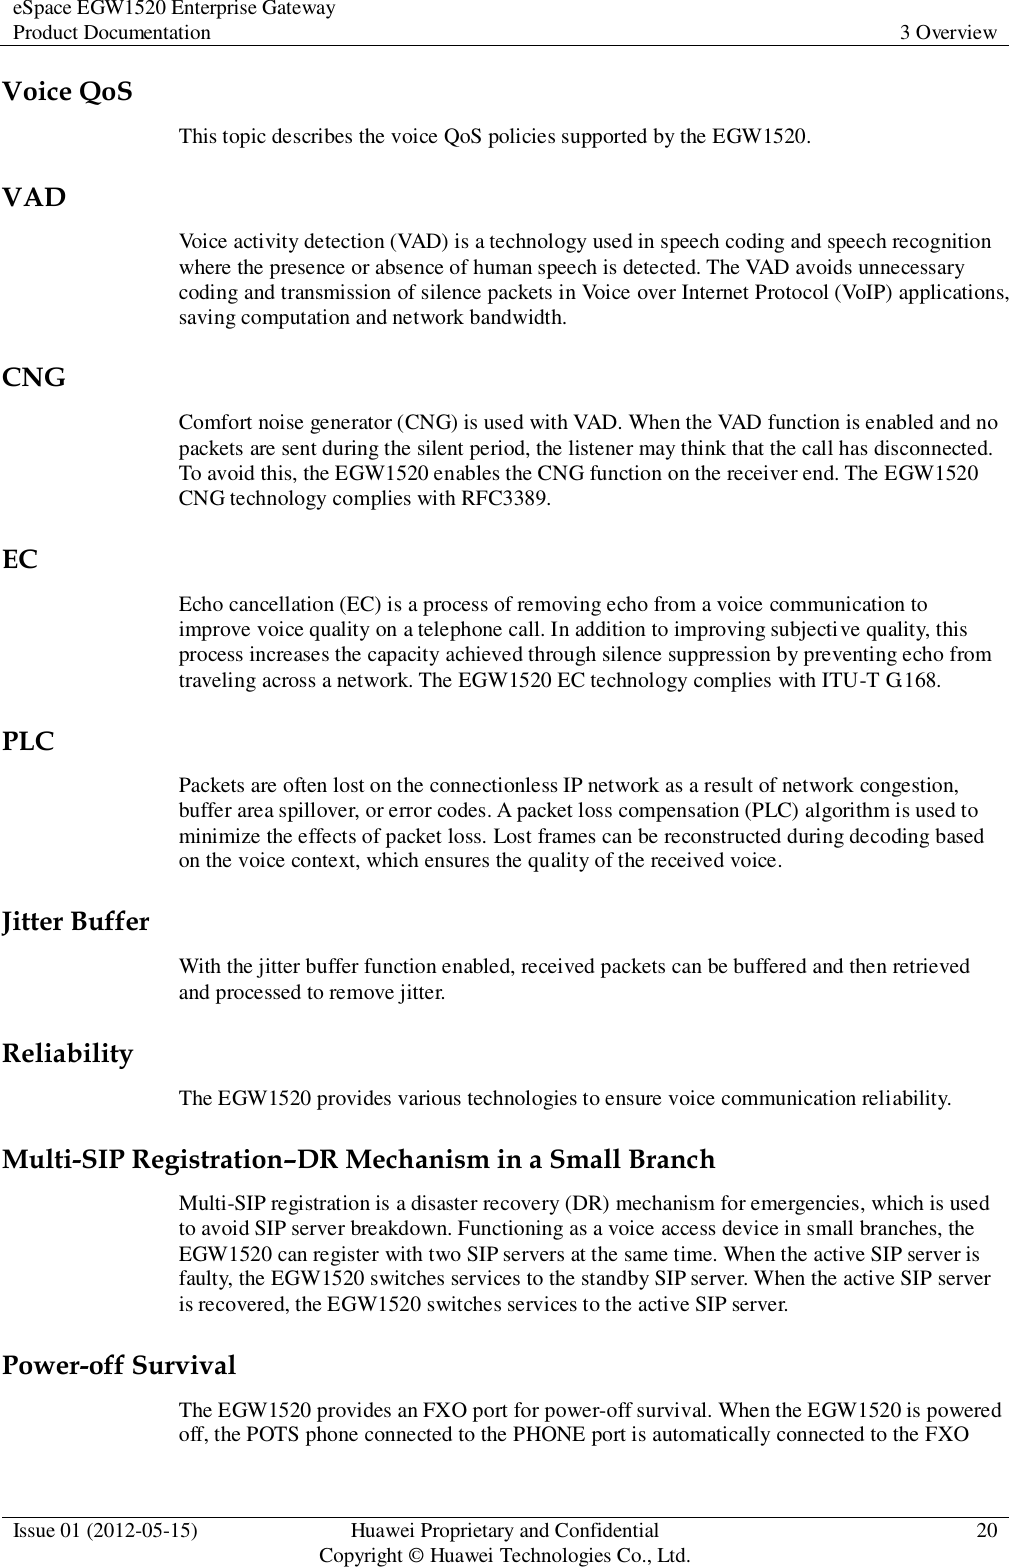 eSpace EGW1520 Enterprise Gateway Product Documentation 3 Overview  Issue 01 (2012-05-15) Huawei Proprietary and Confidential                                     Copyright © Huawei Technologies Co., Ltd. 20  Voice QoS This topic describes the voice QoS policies supported by the EGW1520. VAD Voice activity detection (VAD) is a technology used in speech coding and speech recognition where the presence or absence of human speech is detected. The VAD avoids unnecessary coding and transmission of silence packets in Voice over Internet Protocol (VoIP) applications, saving computation and network bandwidth. CNG Comfort noise generator (CNG) is used with VAD. When the VAD function is enabled and no packets are sent during the silent period, the listener may think that the call has disconnected. To avoid this, the EGW1520 enables the CNG function on the receiver end. The EGW1520 CNG technology complies with RFC3389. EC Echo cancellation (EC) is a process of removing echo from a voice communication to improve voice quality on a telephone call. In addition to improving subjective quality, this process increases the capacity achieved through silence suppression by preventing echo from traveling across a network. The EGW1520 EC technology complies with ITU-T G.168. PLC Packets are often lost on the connectionless IP network as a result of network congestion, buffer area spillover, or error codes. A packet loss compensation (PLC) algorithm is used to minimize the effects of packet loss. Lost frames can be reconstructed during decoding based on the voice context, which ensures the quality of the received voice. Jitter Buffer With the jitter buffer function enabled, received packets can be buffered and then retrieved and processed to remove jitter. Reliability The EGW1520 provides various technologies to ensure voice communication reliability. Multi-SIP Registration–DR Mechanism in a Small Branch Multi-SIP registration is a disaster recovery (DR) mechanism for emergencies, which is used to avoid SIP server breakdown. Functioning as a voice access device in small branches, the EGW1520 can register with two SIP servers at the same time. When the active SIP server is faulty, the EGW1520 switches services to the standby SIP server. When the active SIP server is recovered, the EGW1520 switches services to the active SIP server. Power-off Survival The EGW1520 provides an FXO port for power-off survival. When the EGW1520 is powered off, the POTS phone connected to the PHONE port is automatically connected to the FXO 